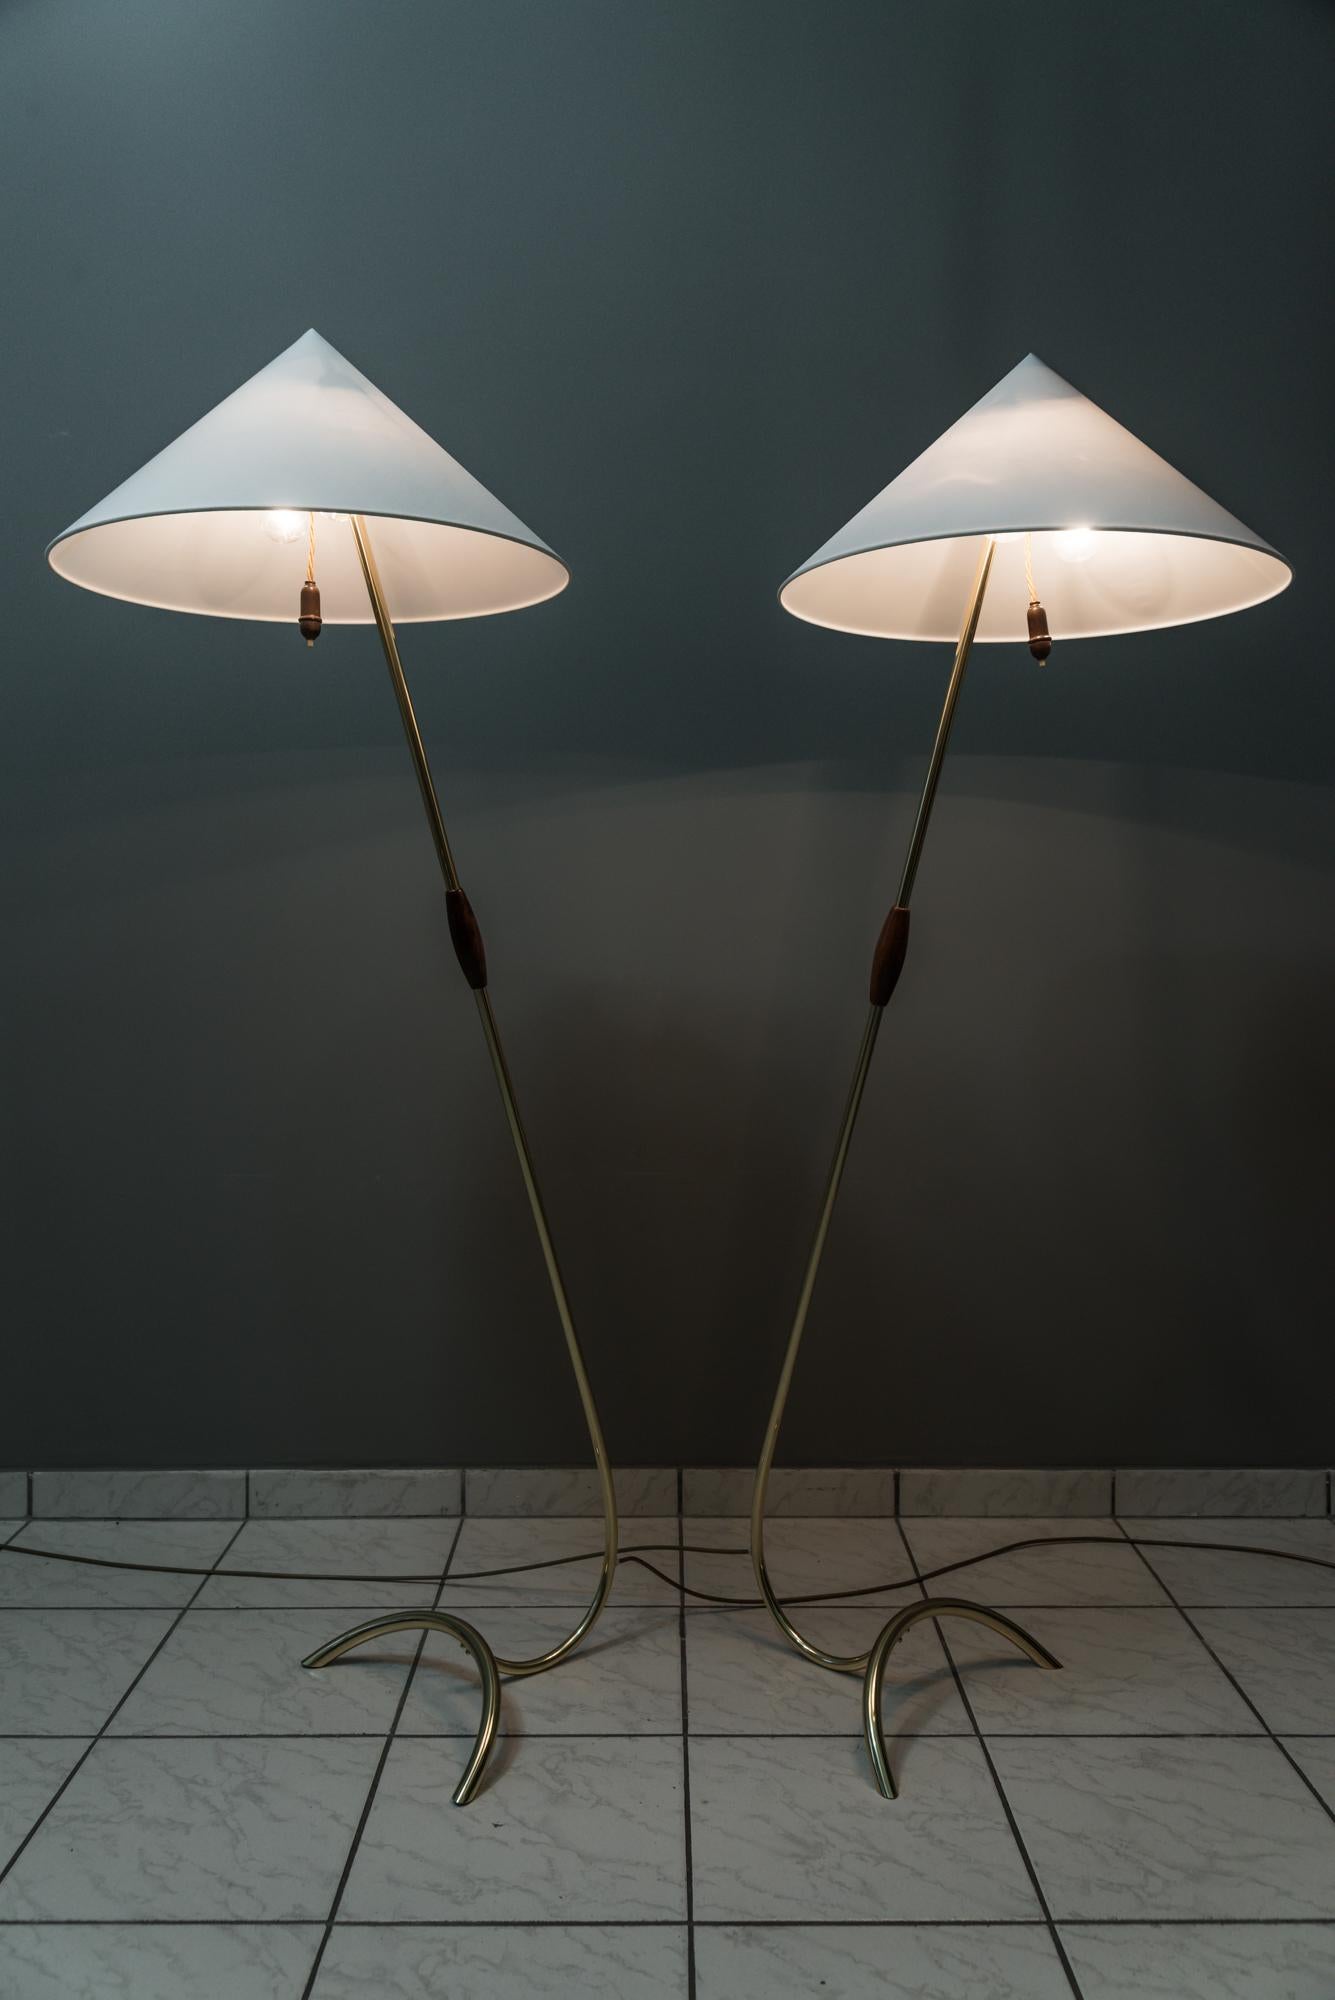 Two Rupert Nikoll floor lamps, circa 1950s
The floor lamps are polished and stove enamelled.
The shades are replaced (new).
The original wood handles are polished.
The floor lamps are in a excellent conditions.
Price is for the pair.